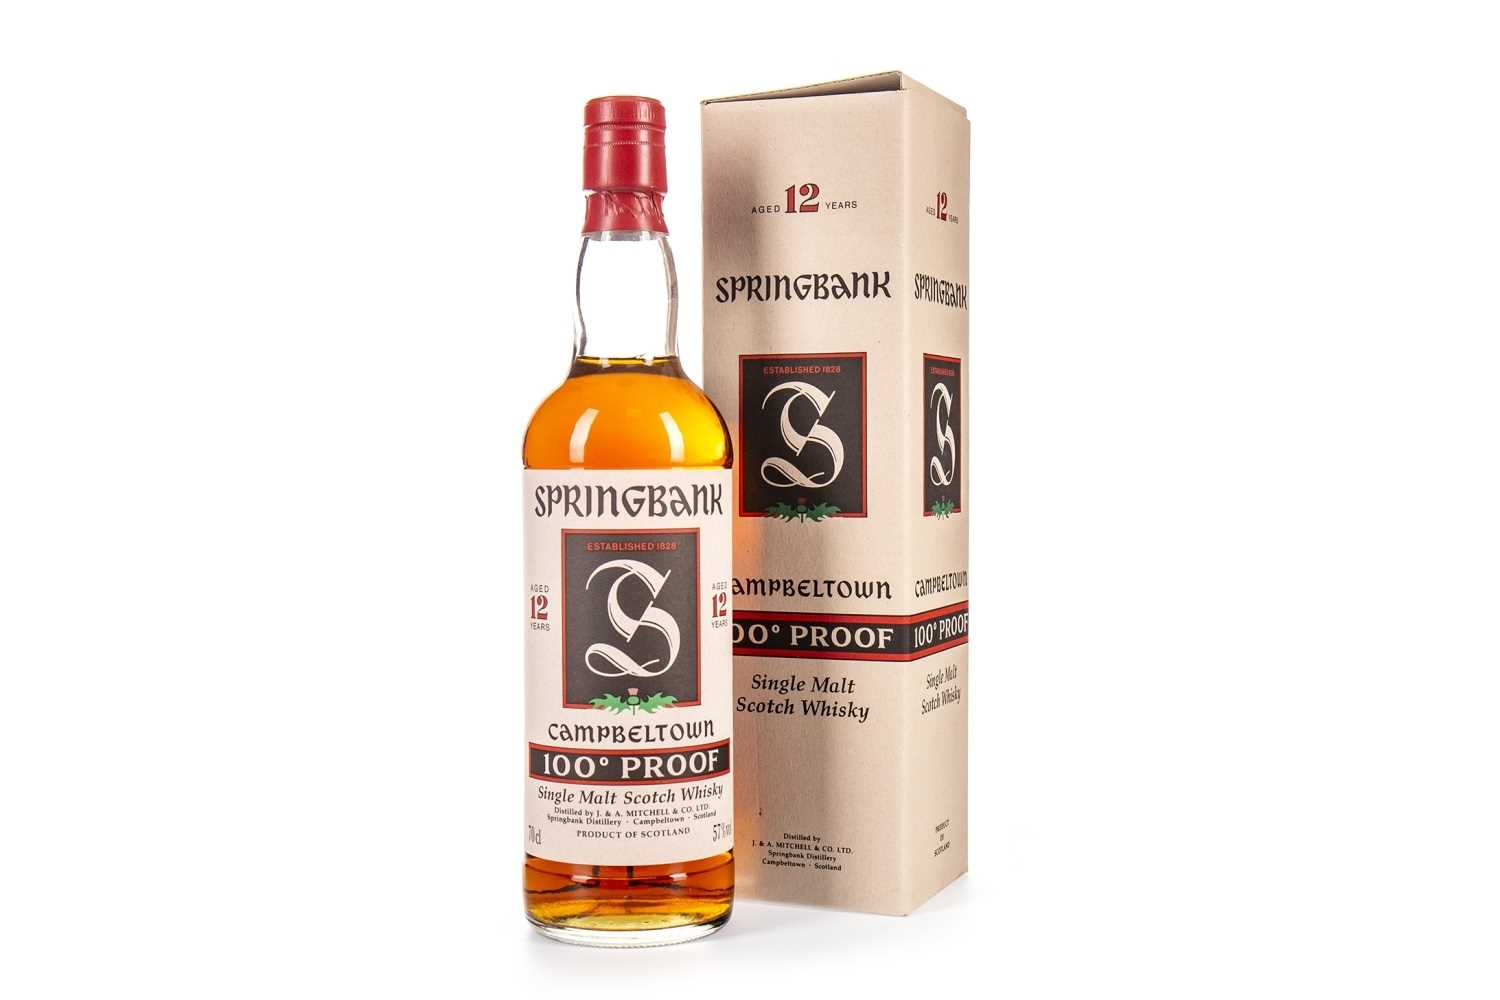 Lot 81 - SPRINGBANK AGED 12 YEARS 100 PROOF